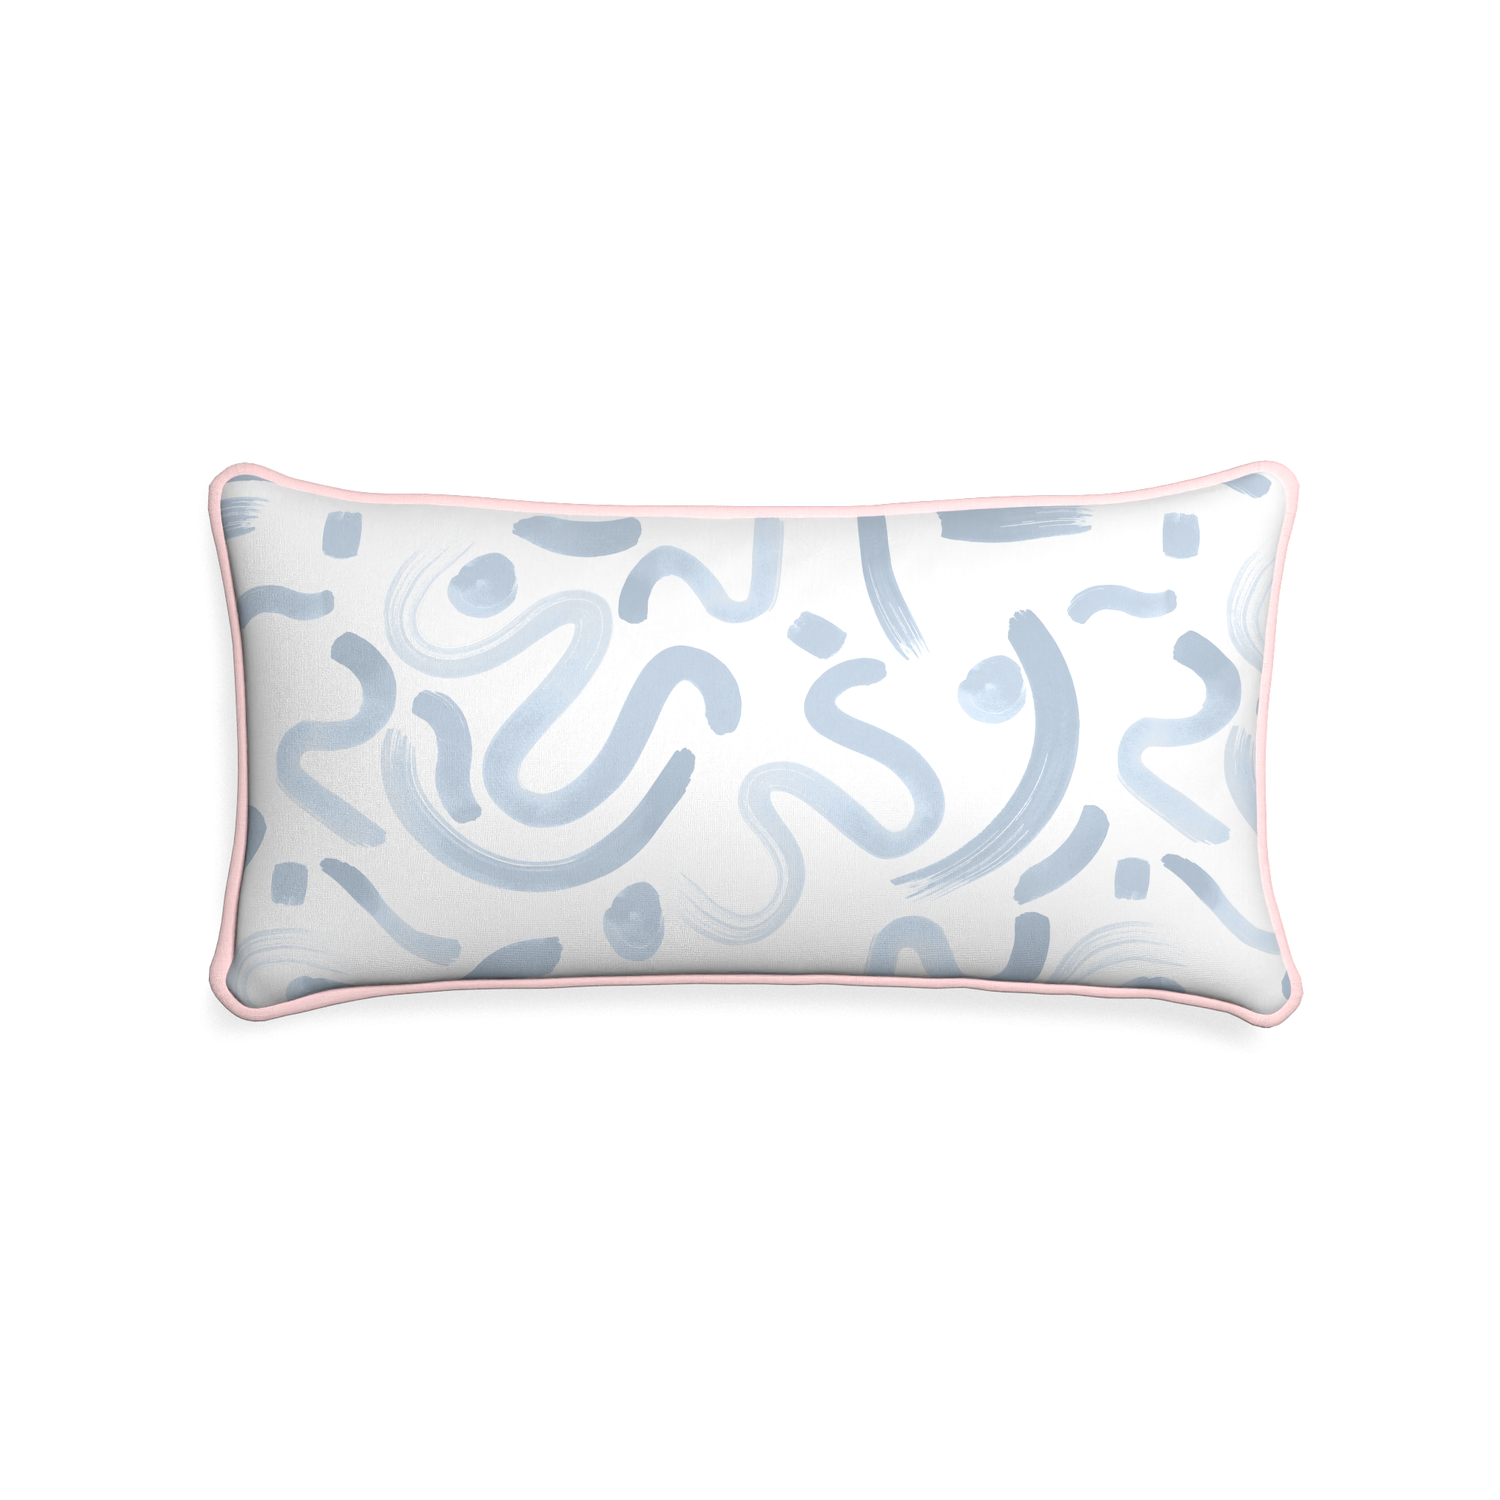 Midi-lumbar hockney sky custom abstract sky bluepillow with petal piping on white background